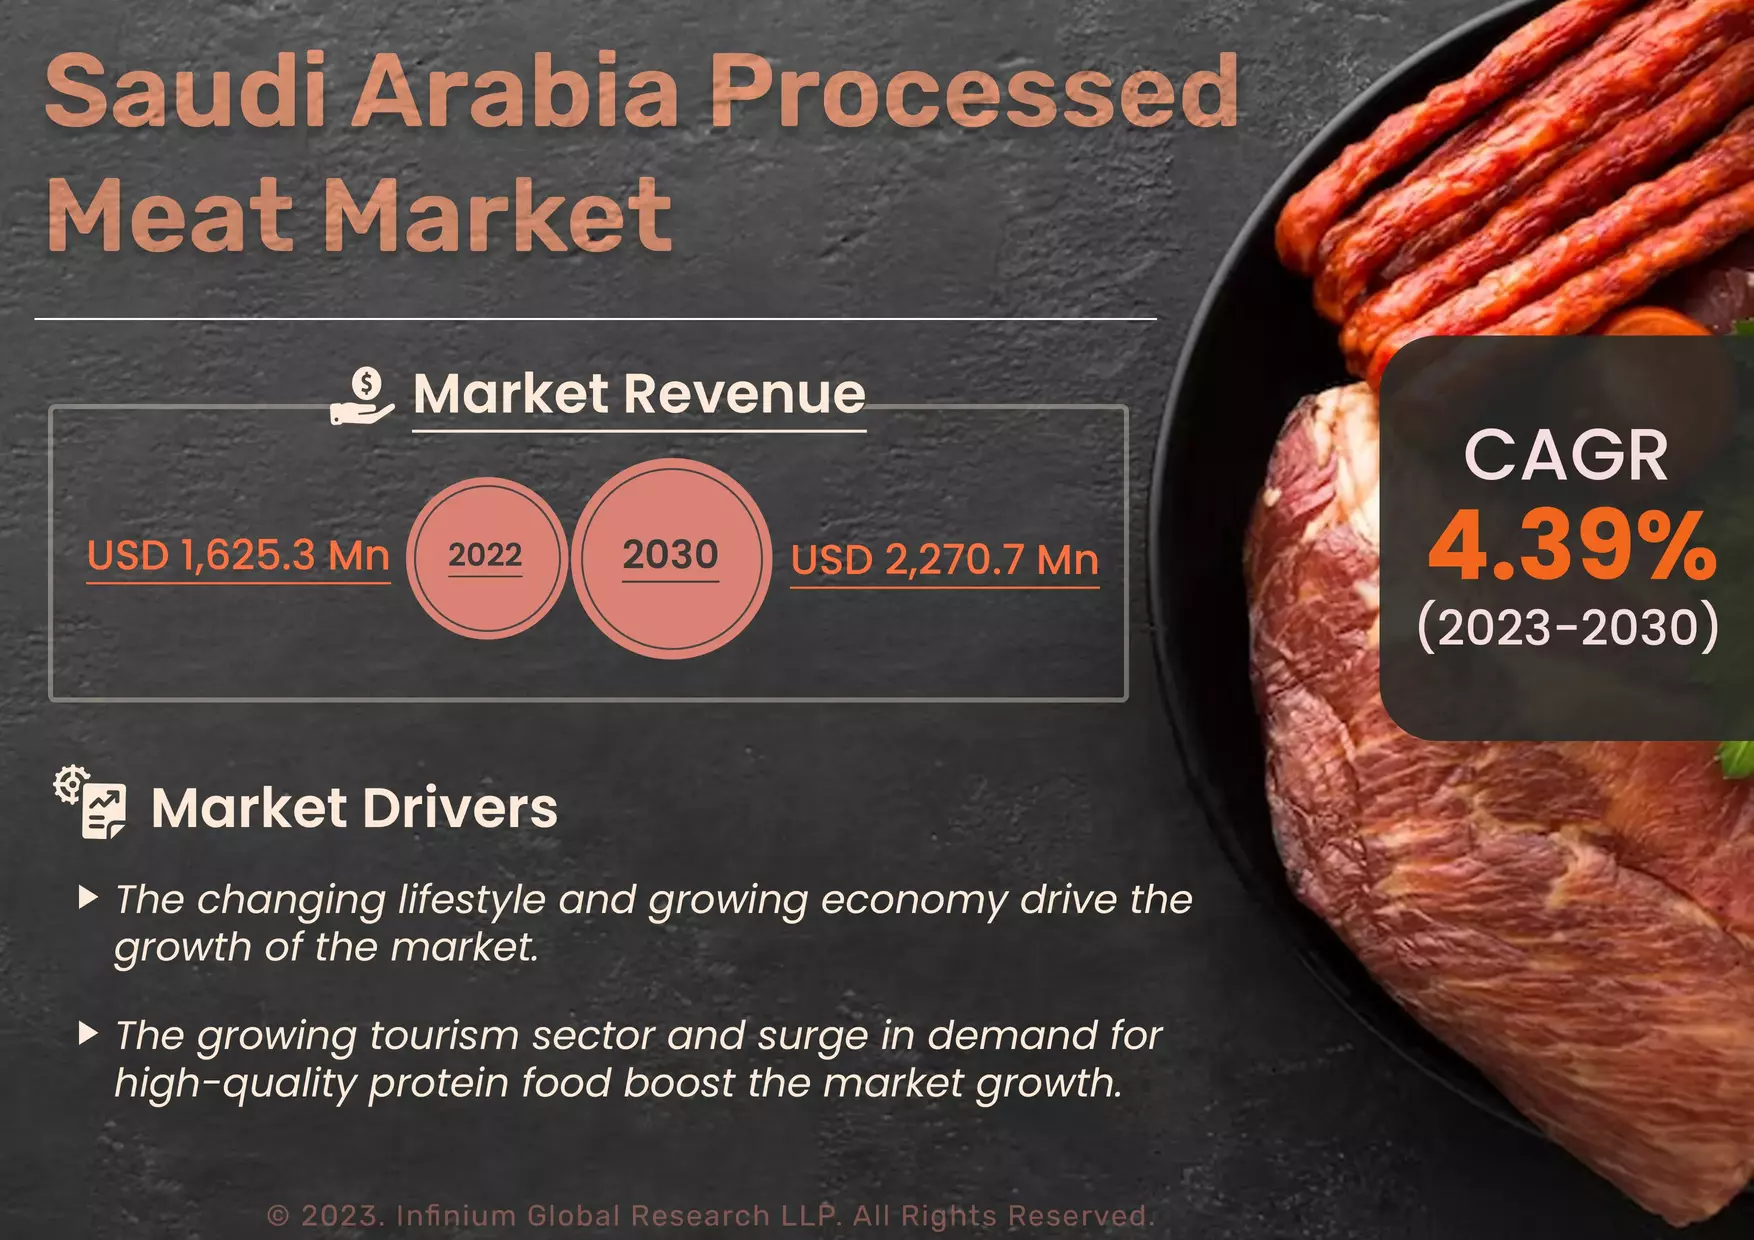 Saudi Arabia Processed Meat Market Was Valued at USD 1,625.3 Million in 2022 and is Expected to Reach USD 2,270.7 Million by 2030 and Grow at a CAGR of 4.39% Over the Forecast Period 2023-2030.